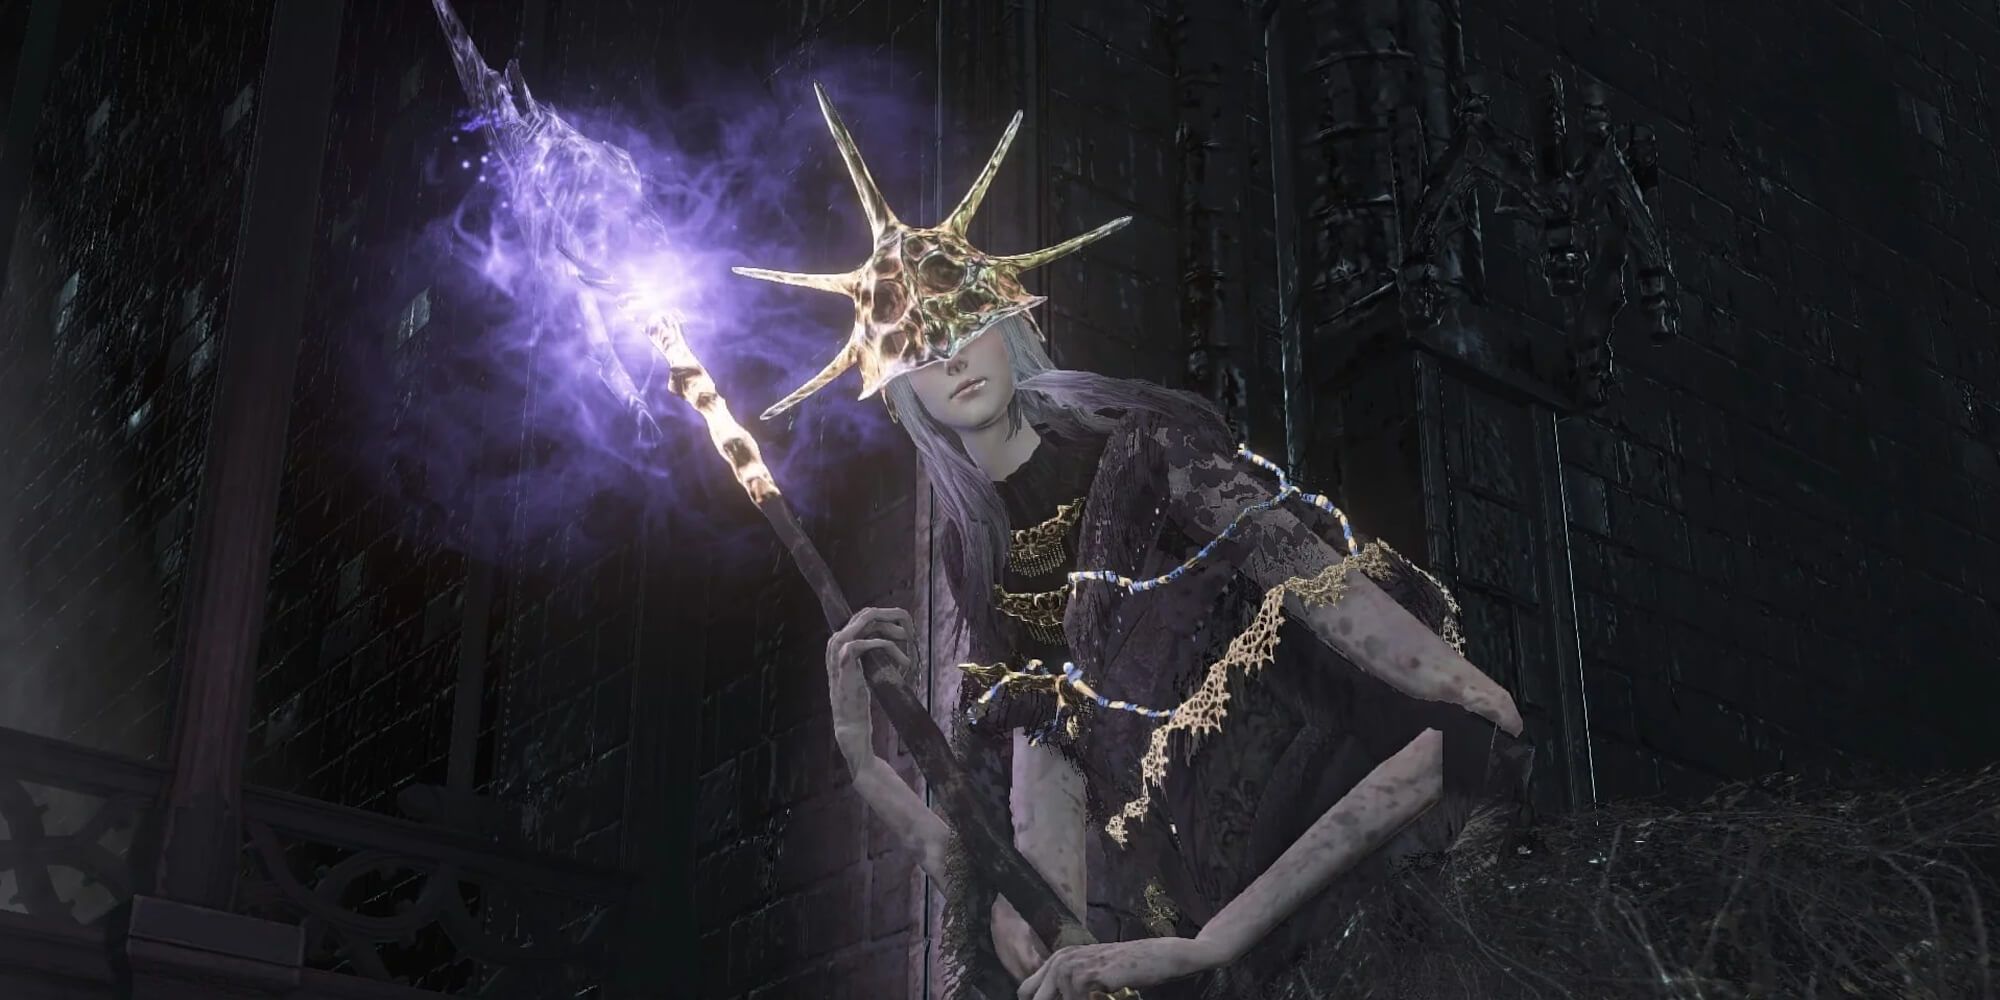 Possessed Gwyndolin With A Glowing Spear During Battle